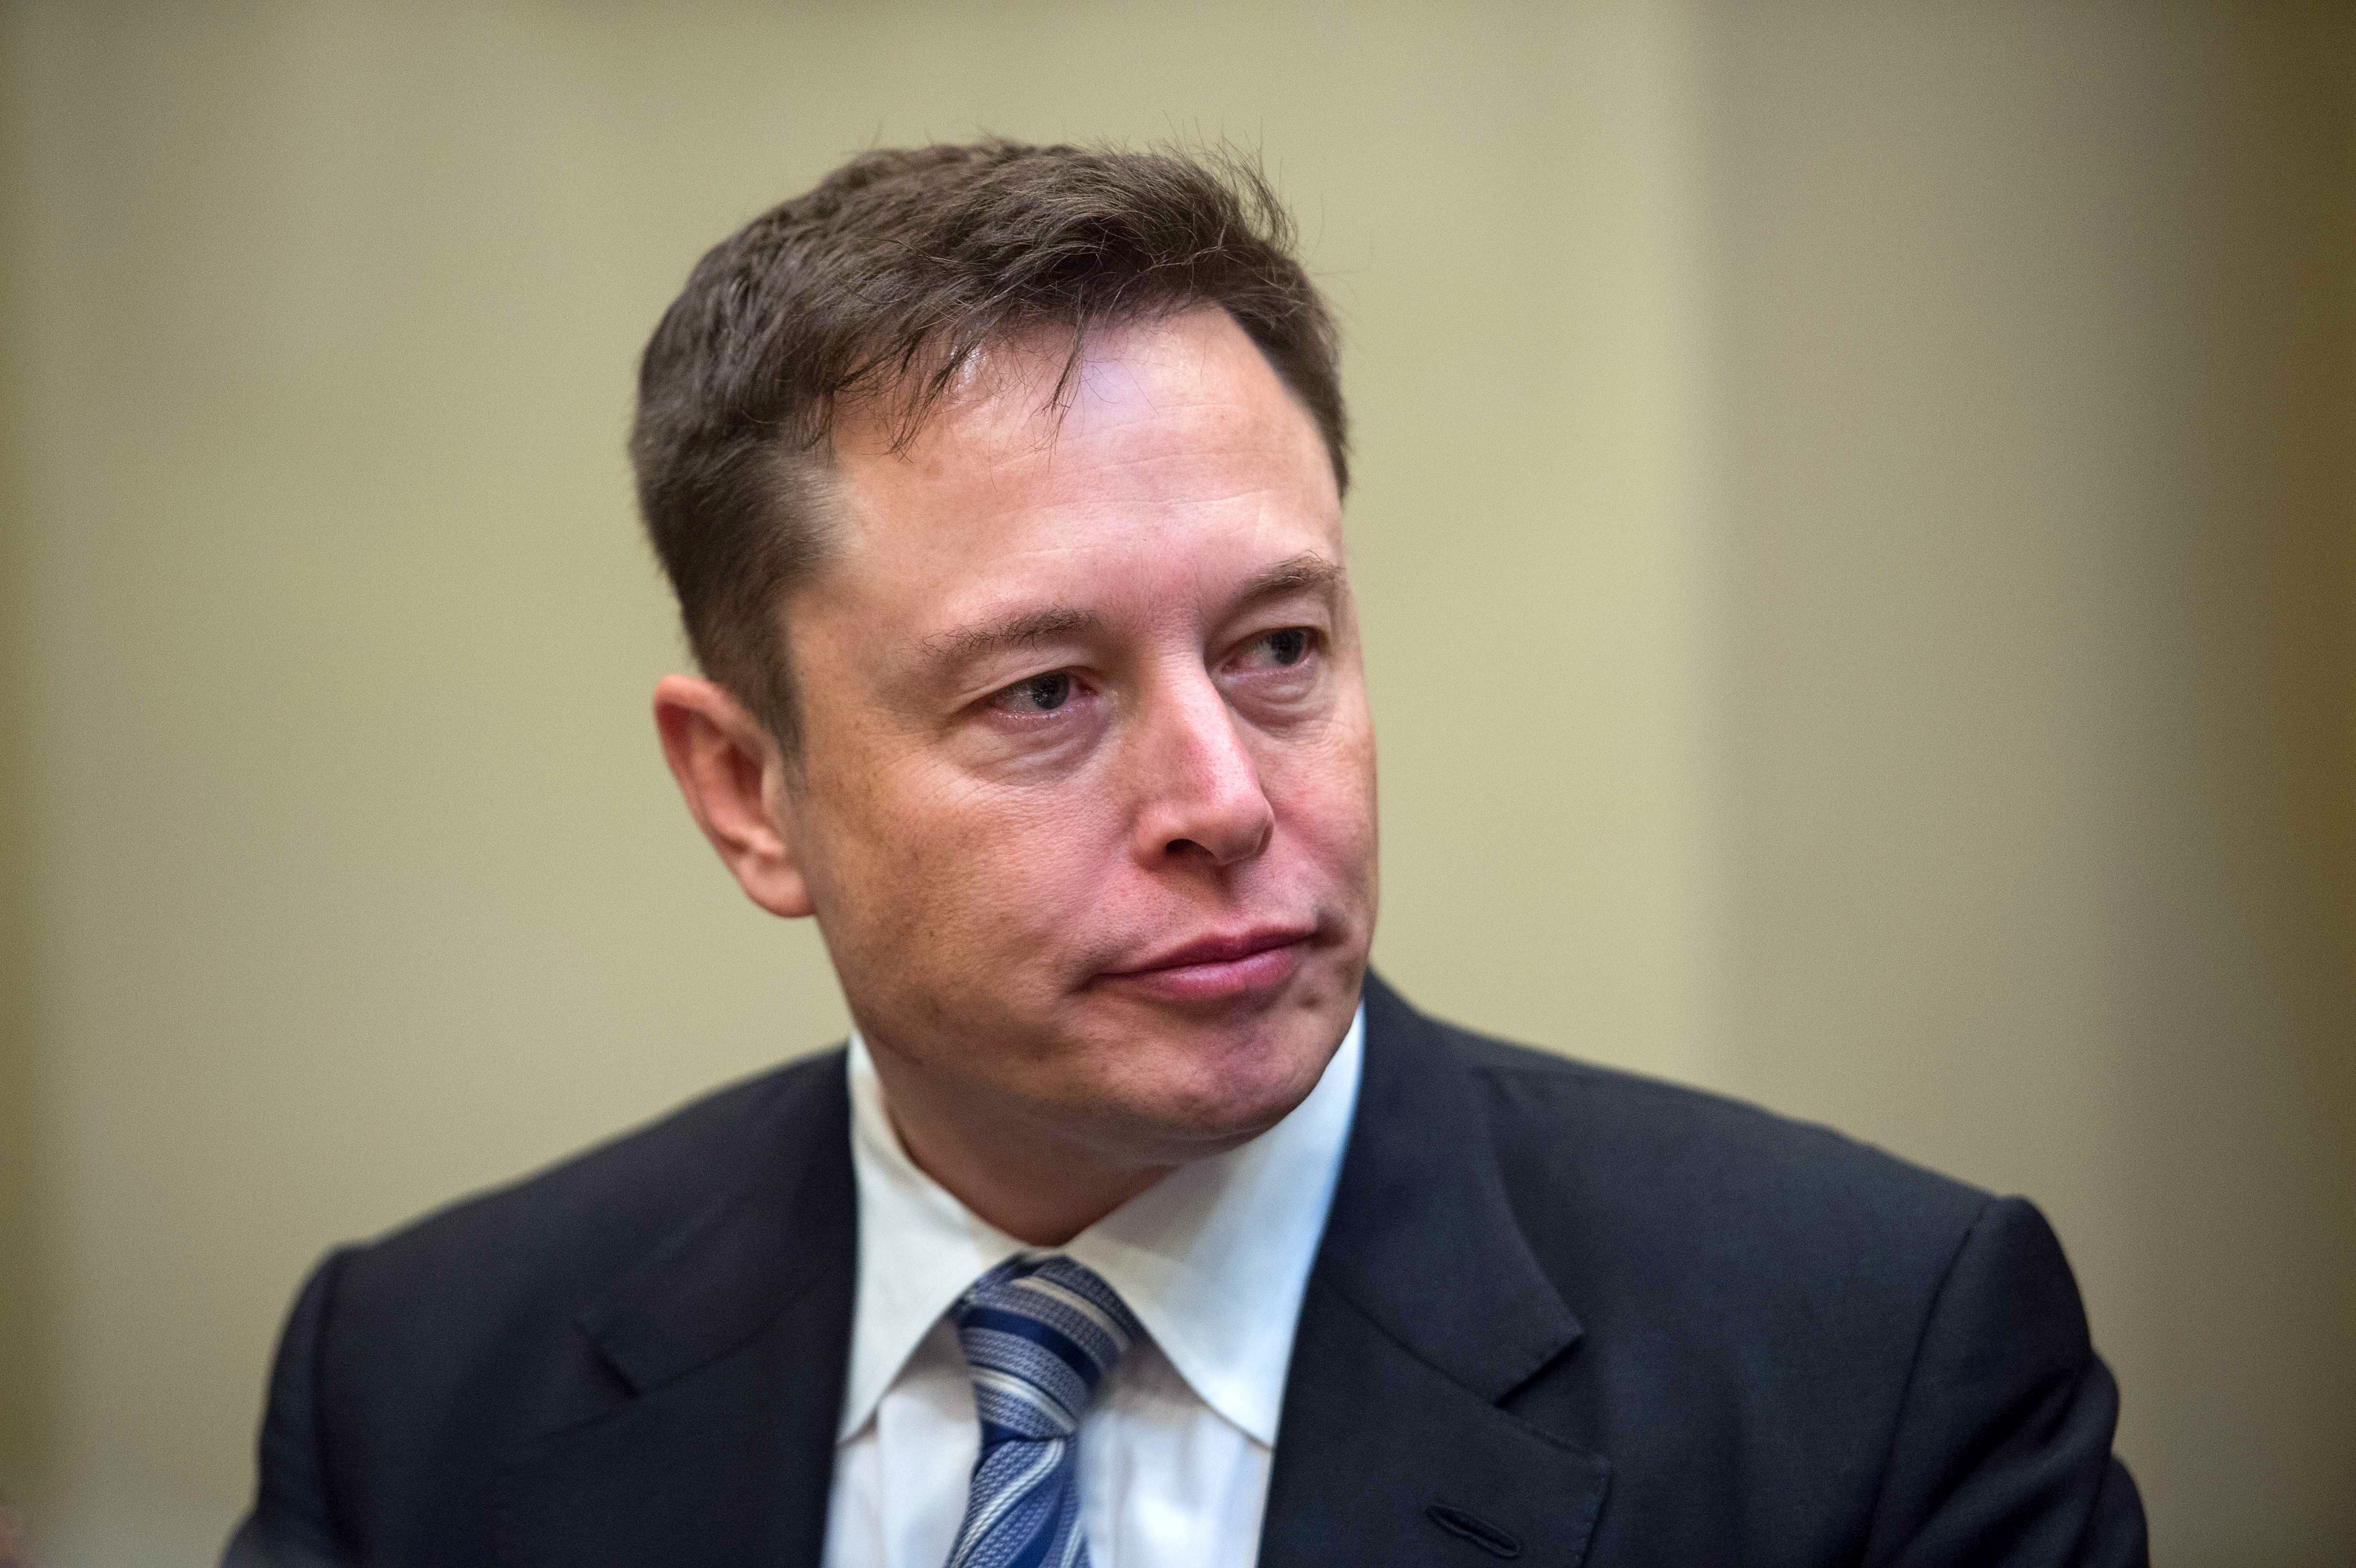 Elon Musk agreed Saturday to step down as chairman of Tesla and pay a $20 million fine in a deal to settle charges brought this week by the Securities and Exchange Commission.